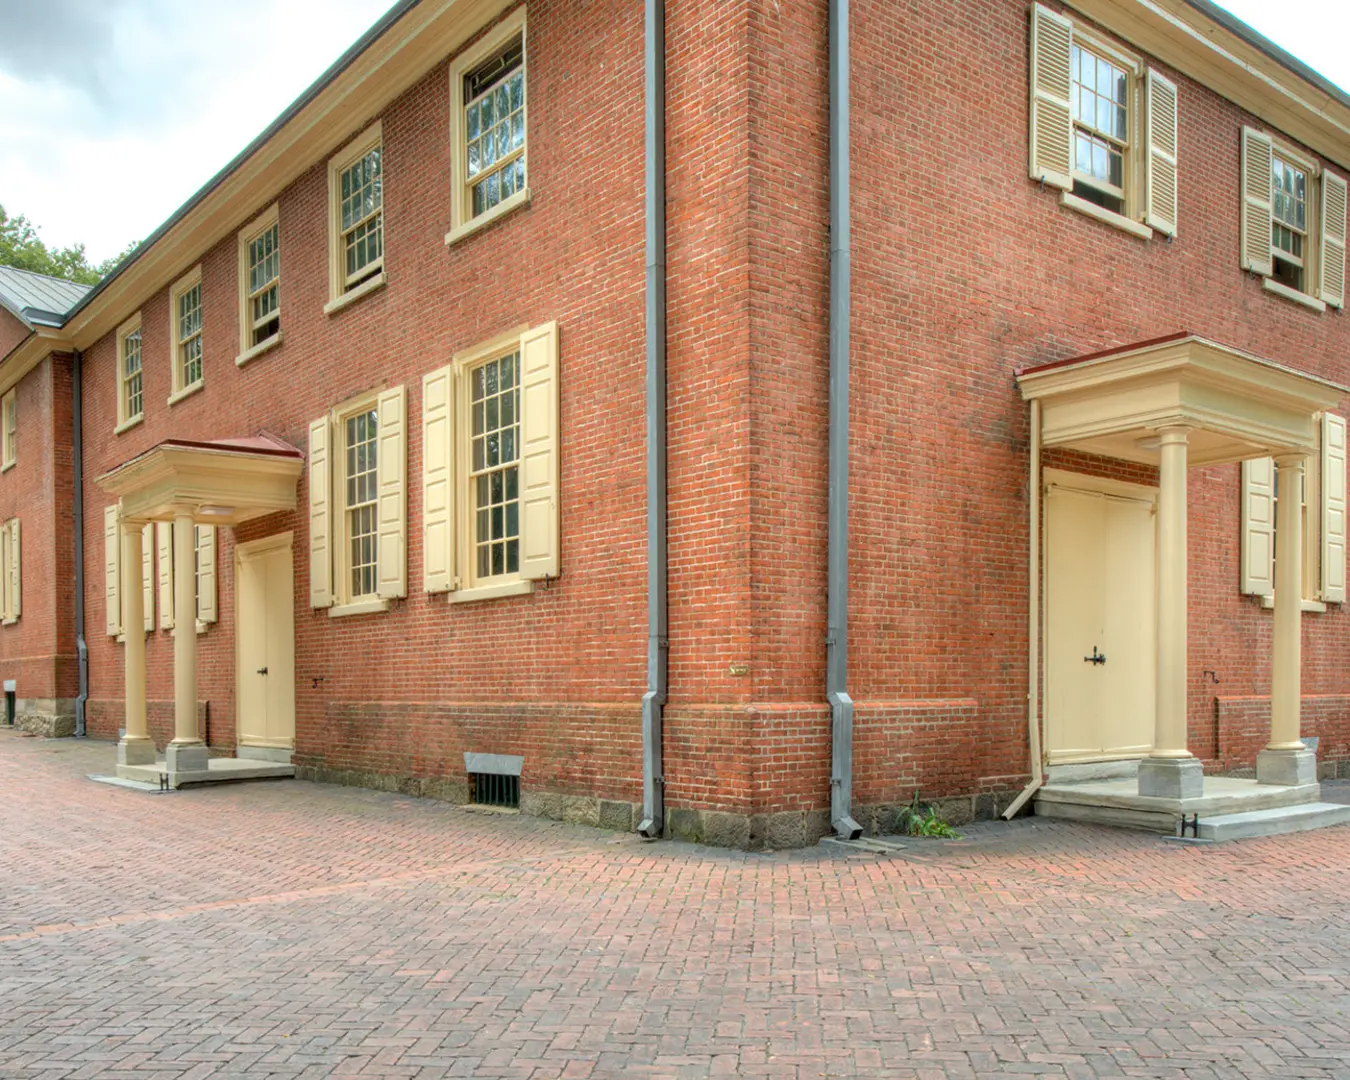 Most meetinghouses are &frac14; of the size of the Arch Street Meeting House, which is so large because it was constructed to hold an annual meeting of Quakers from Pennsylvania, New Jersey, Maryland, Delaware. Photo by Brian Kutner.